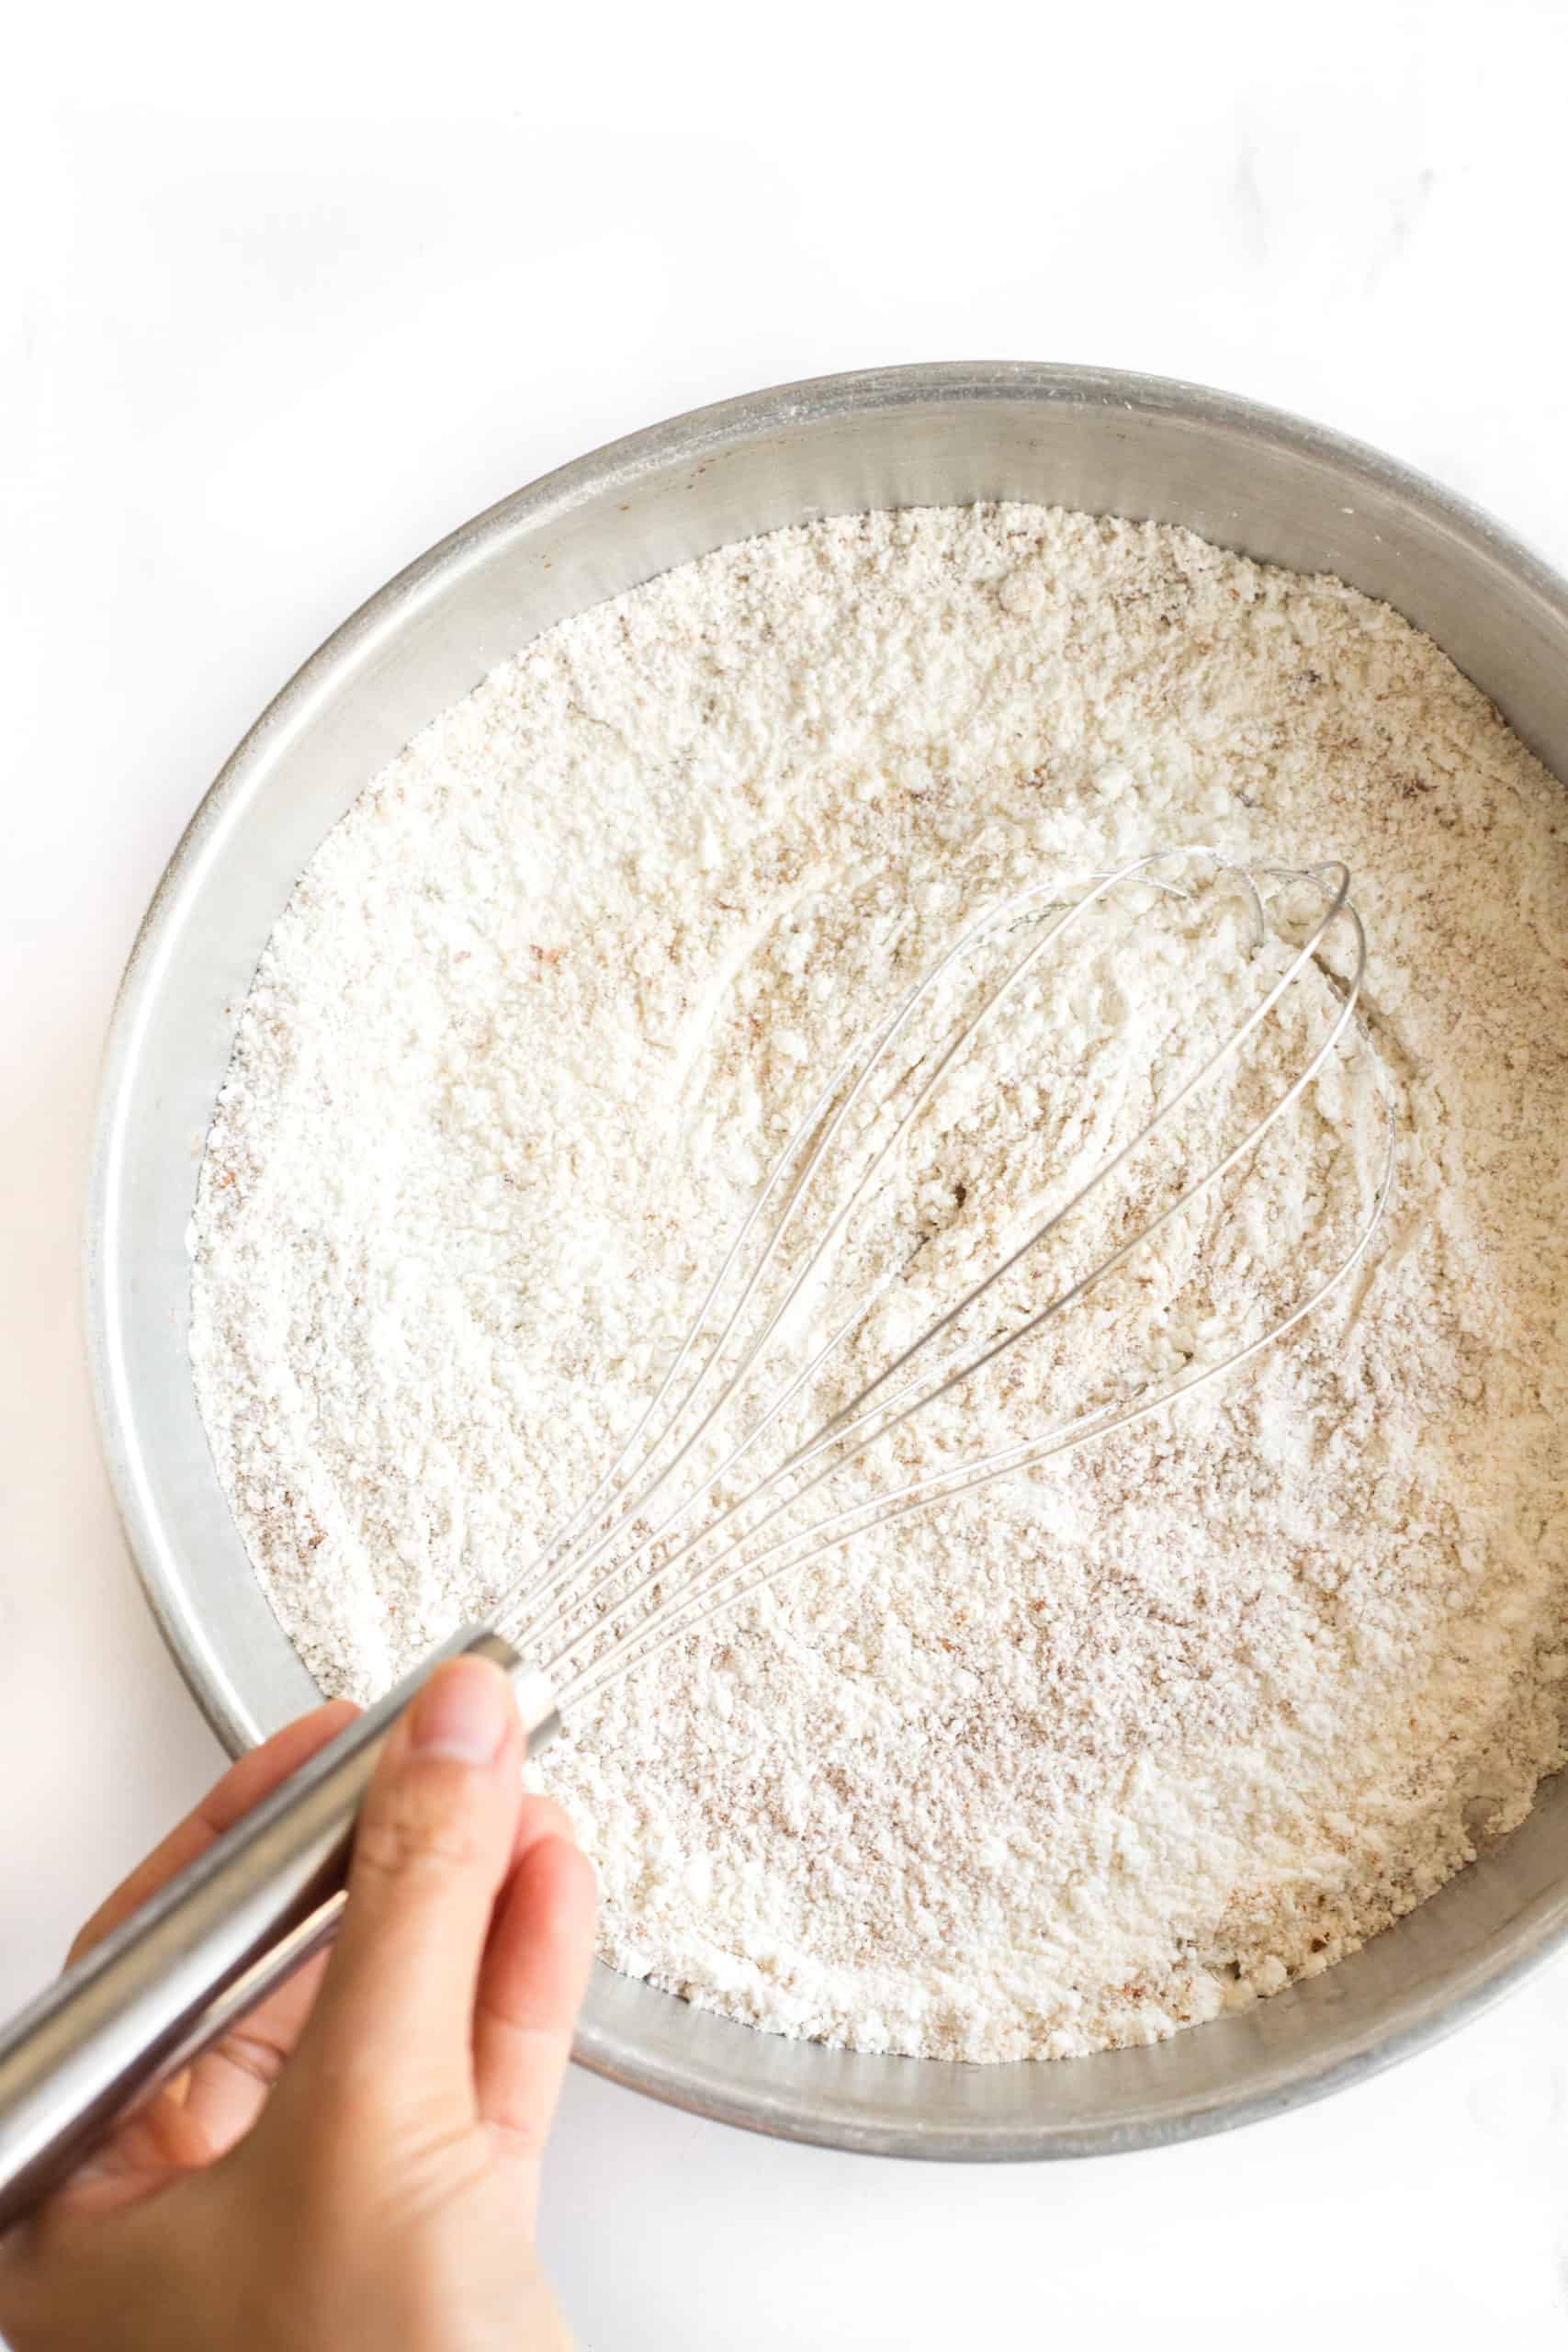 Hand whisking flour in a metal bowl.